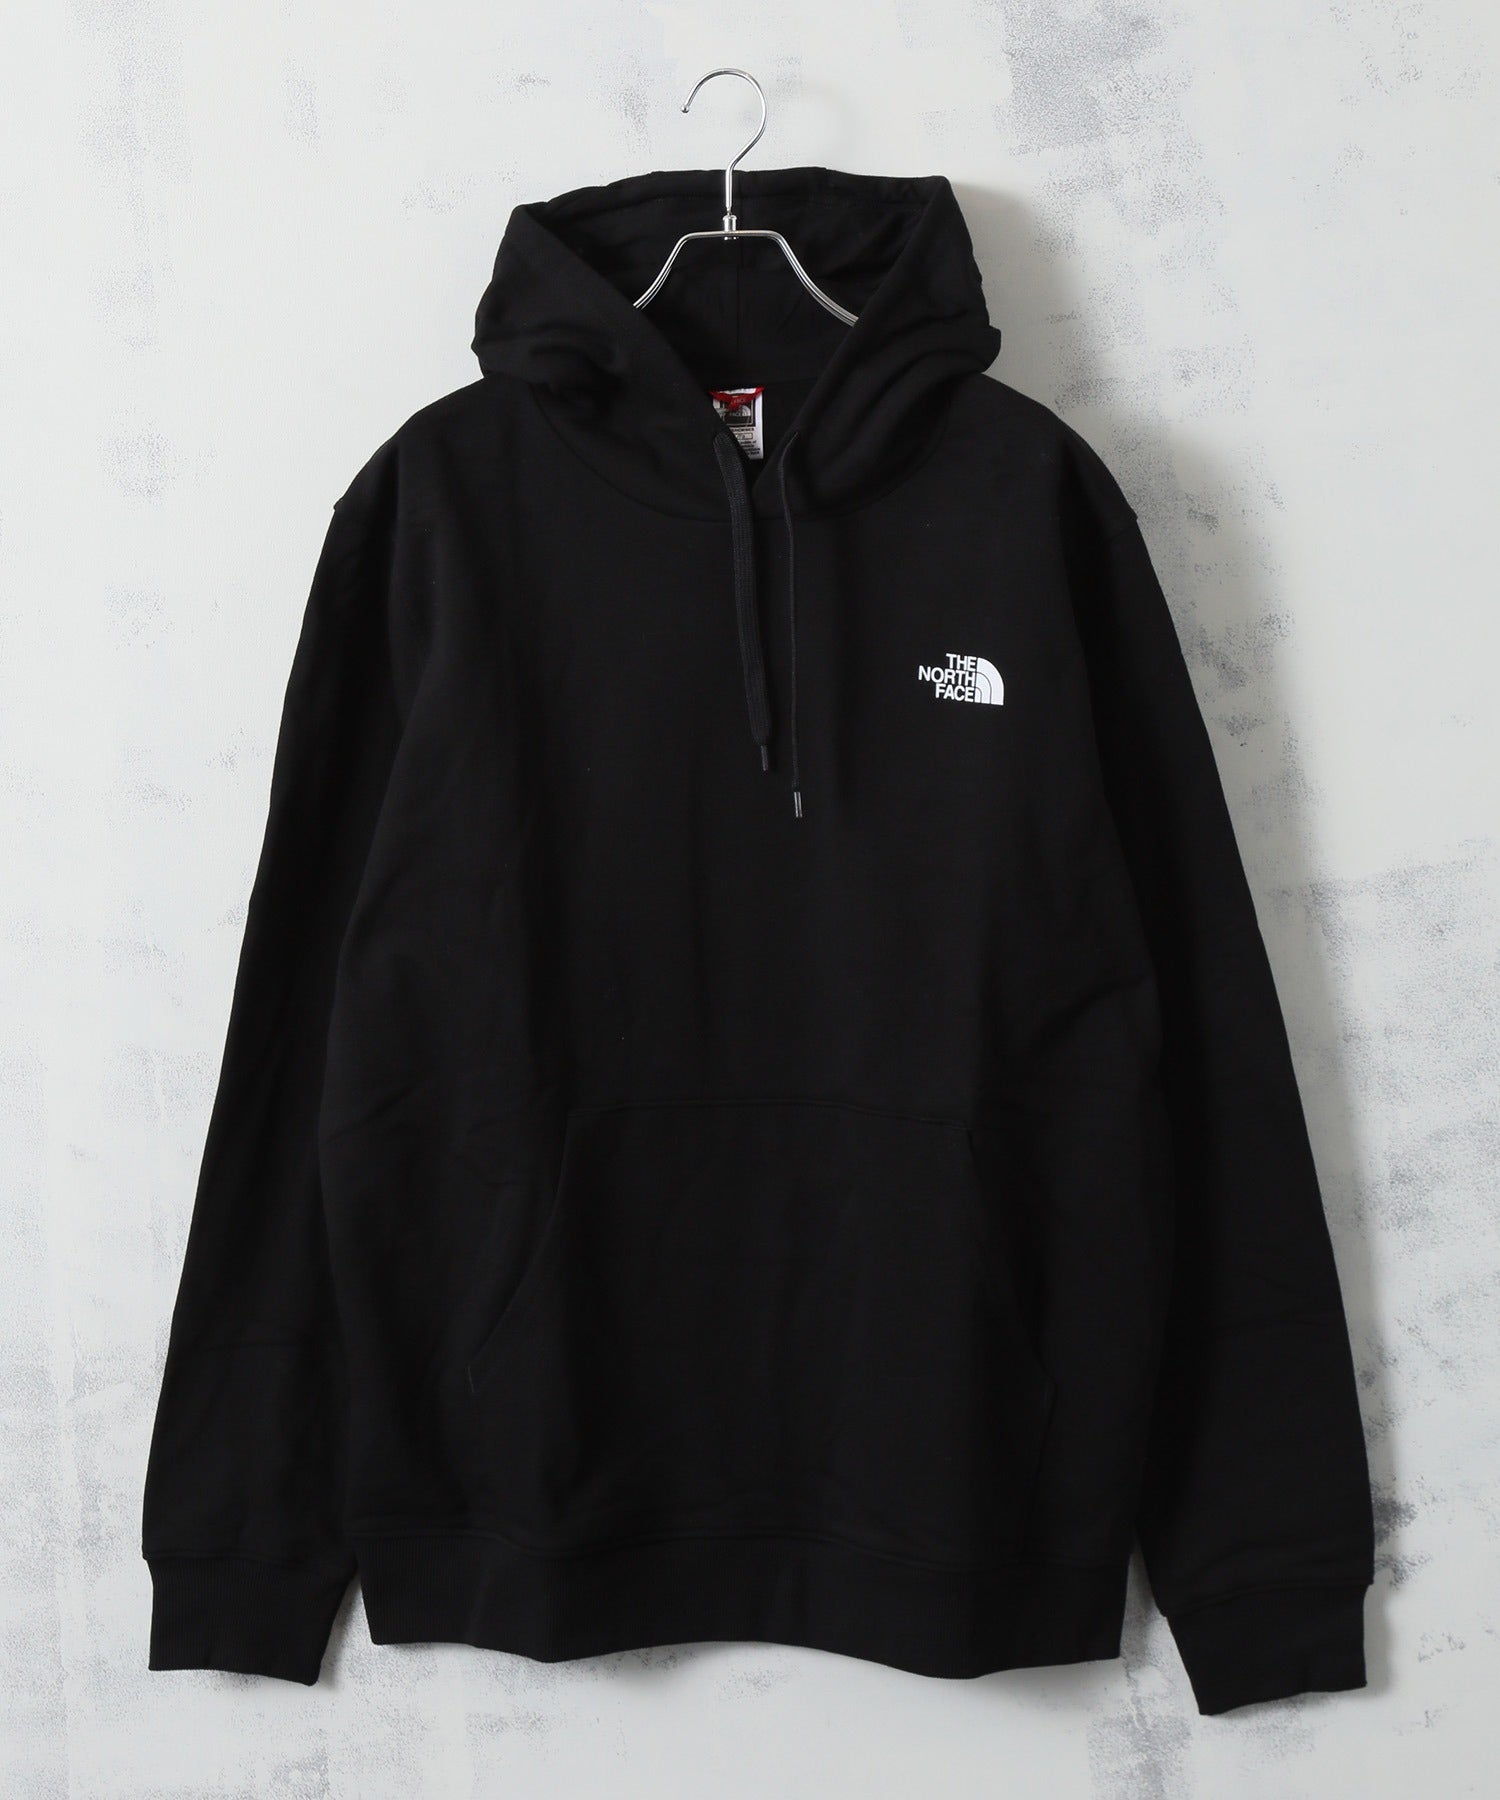 THE NORTH FACE/ザノースフェイス】Simple Dome Hoodie/シンプル